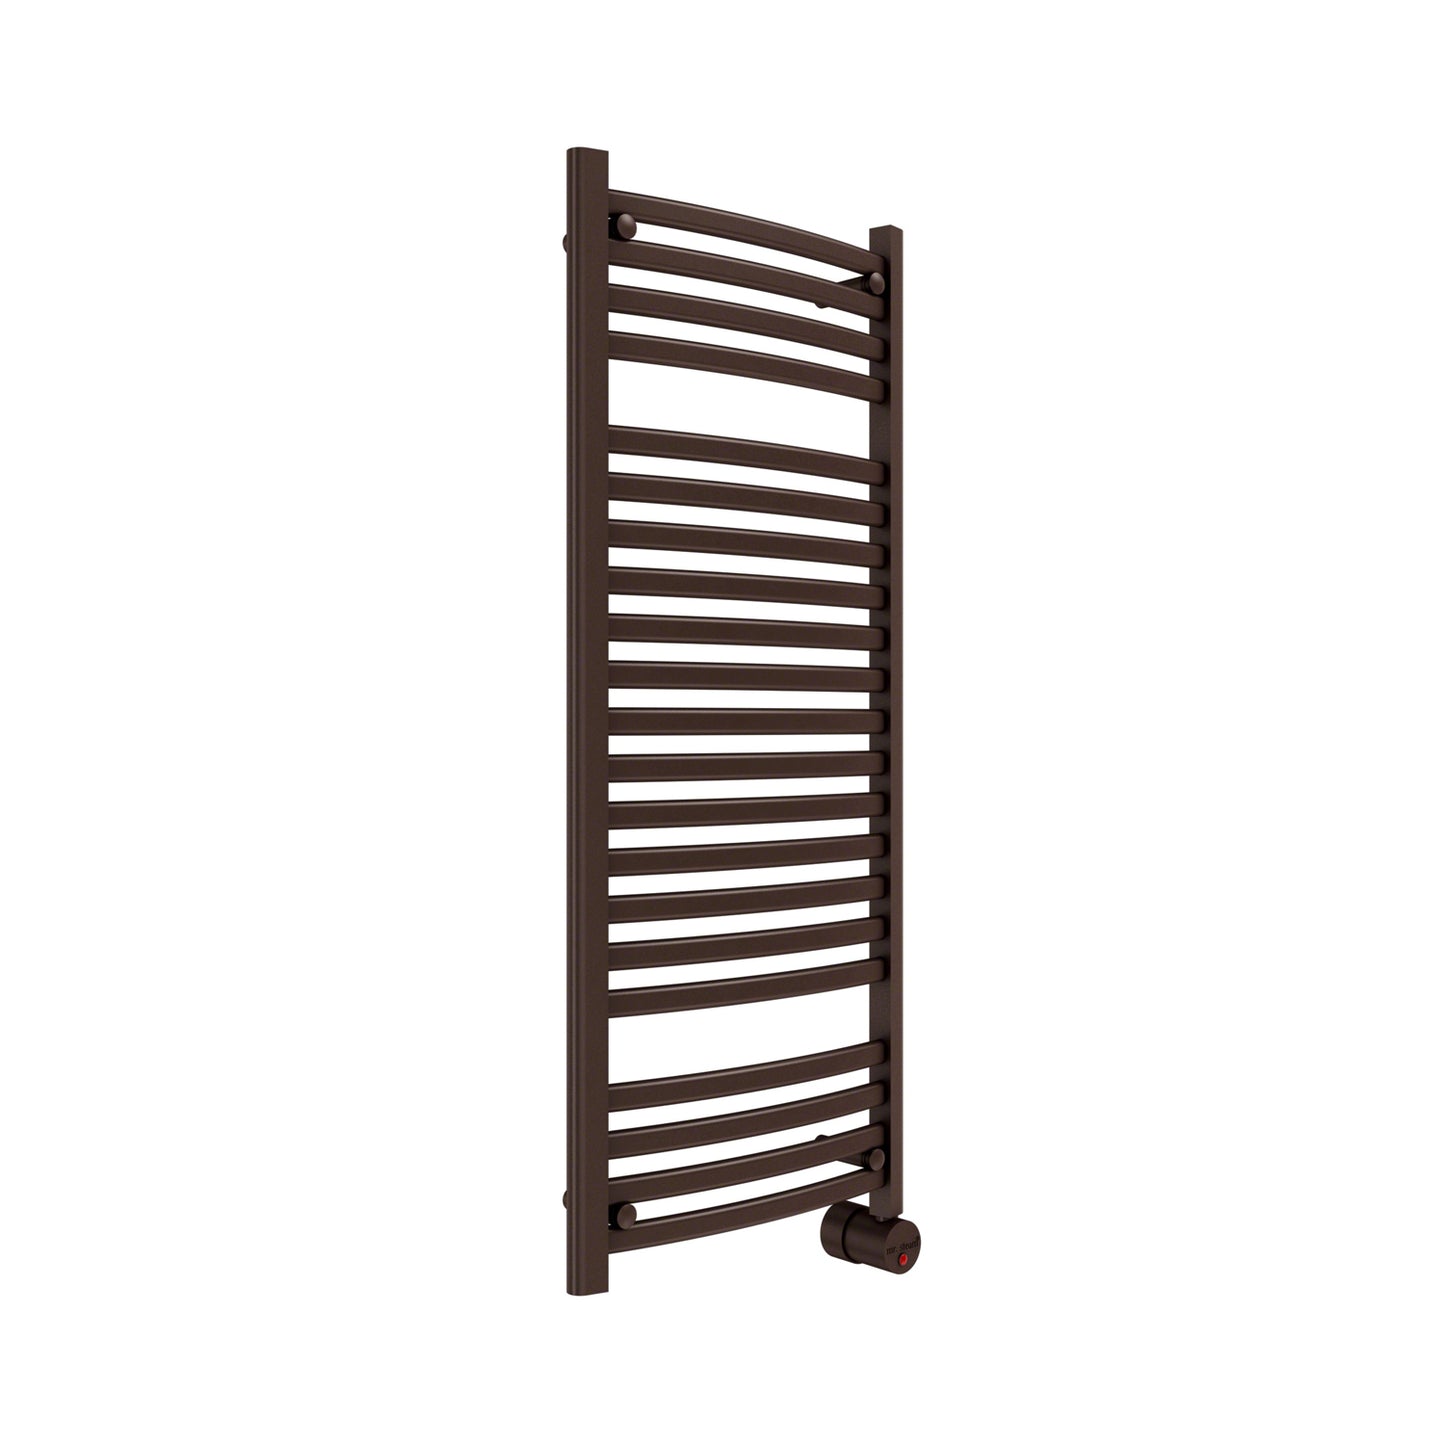 W248 21-Bar Wall Mounted Electric Towel Warmer with Digital Timer in Oil Rubbed Bronze